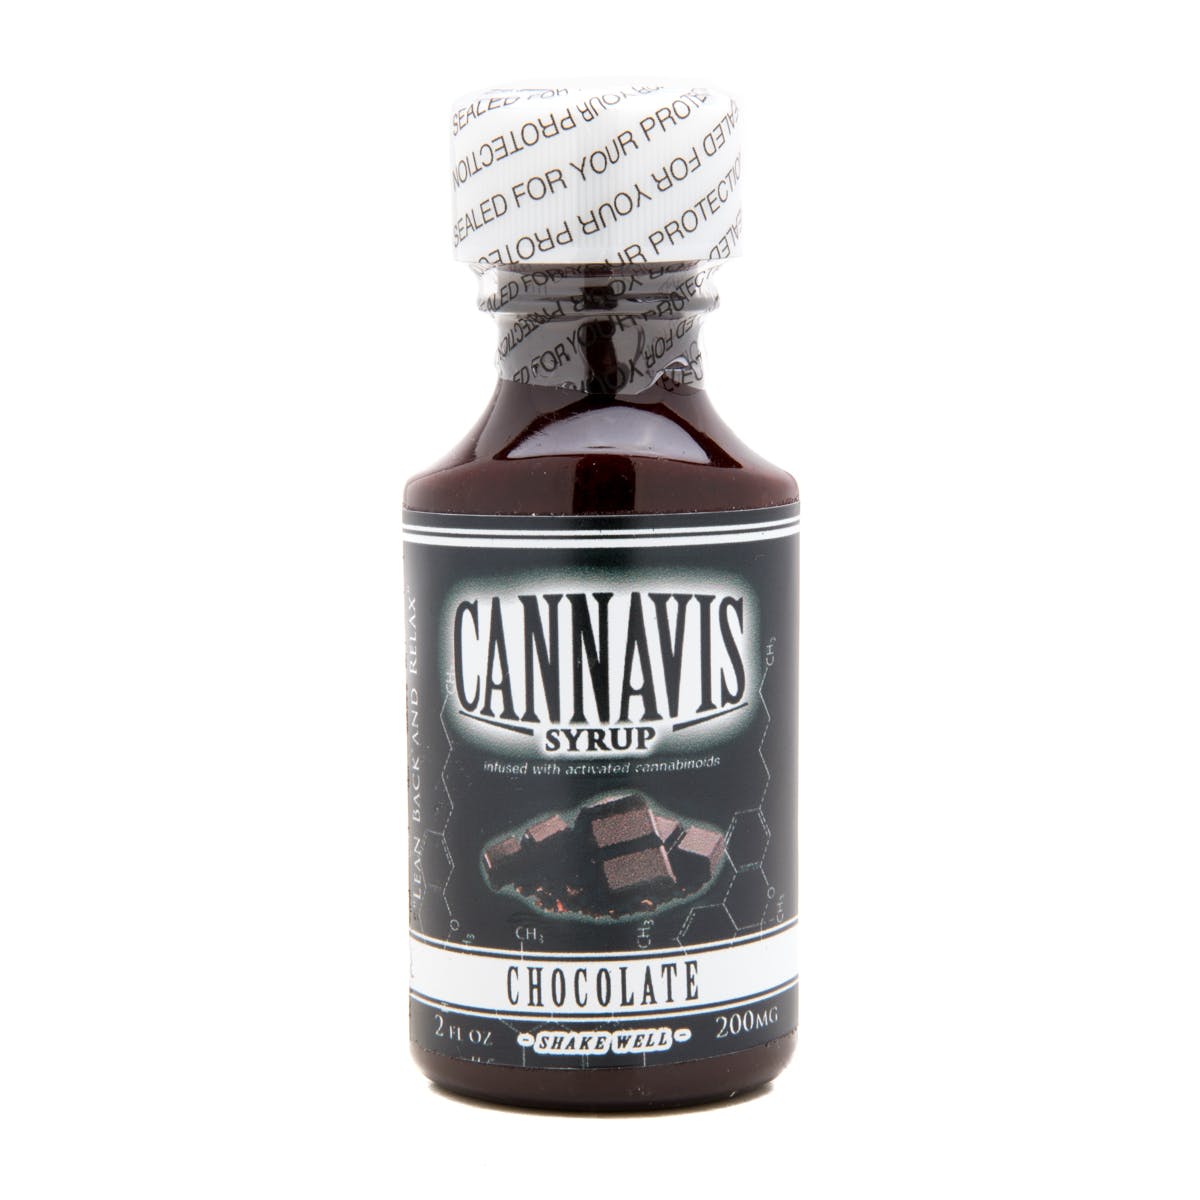 marijuana-dispensaries-church-of-holy-fire-in-city-of-industry-cannavis-syrup-2c-chocolate-200mg